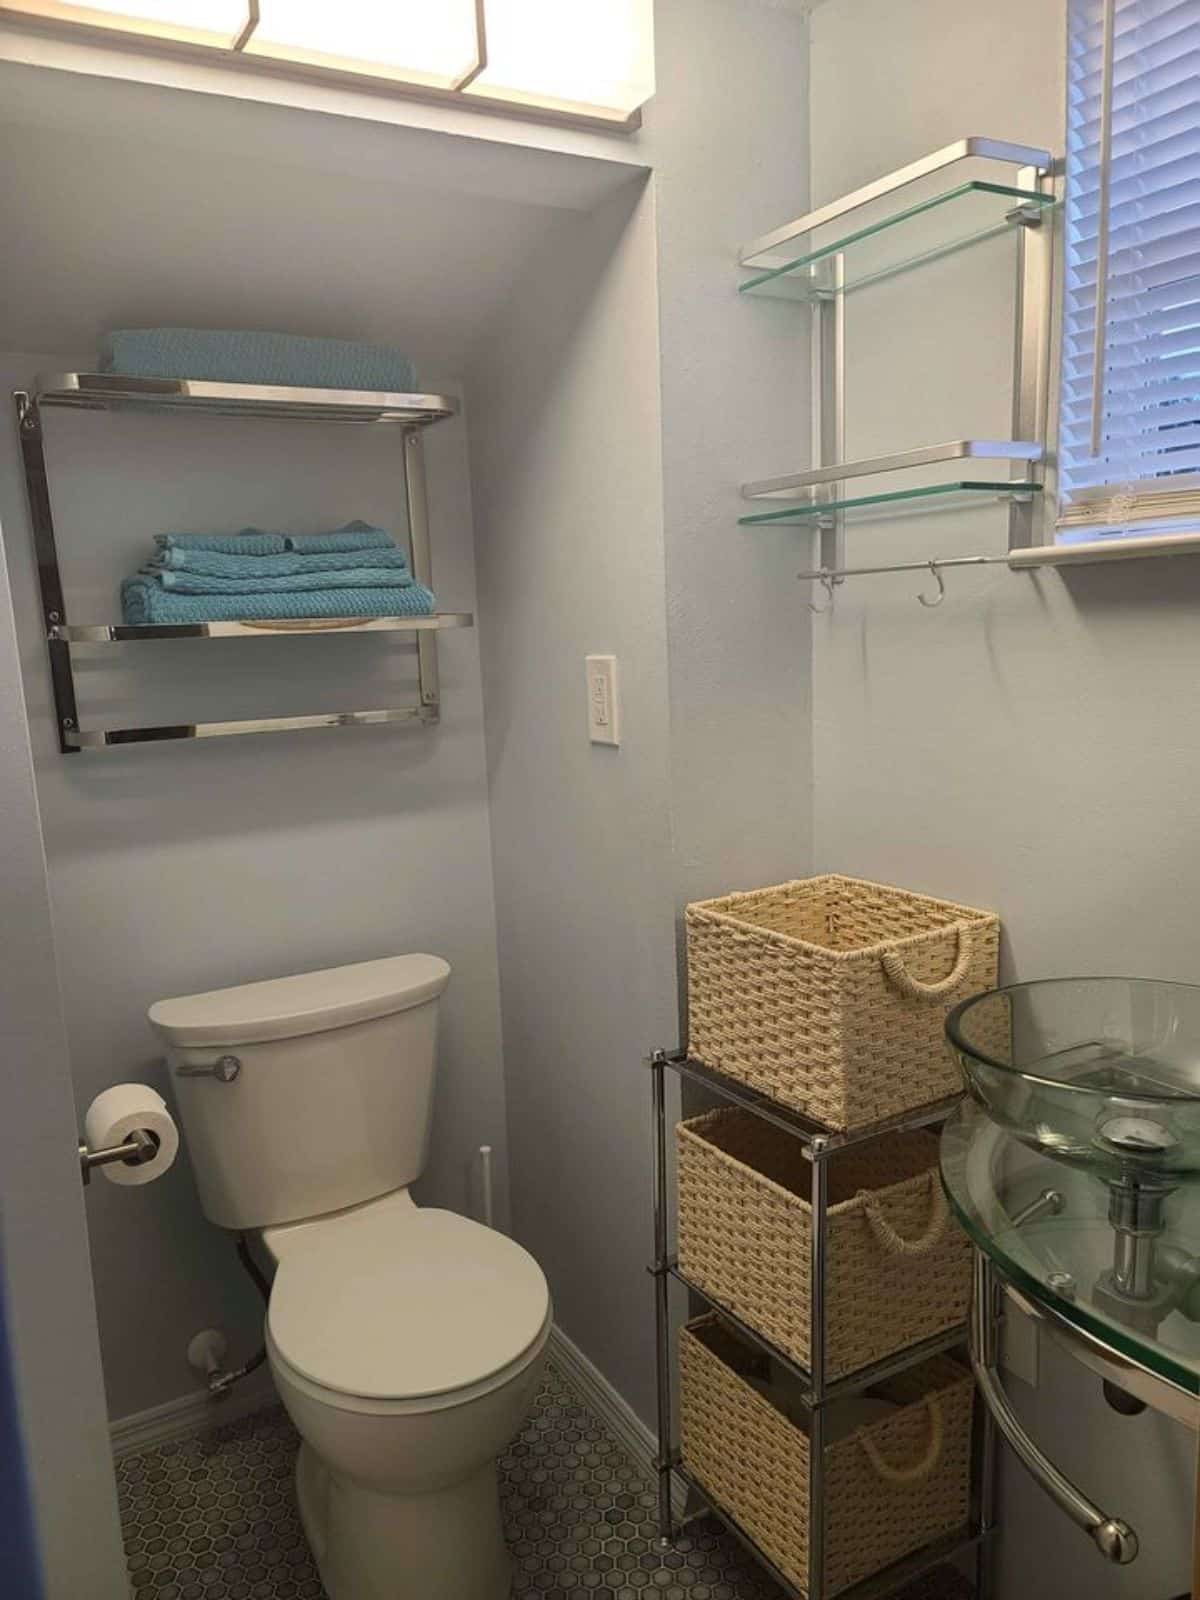 standard toilet and open shelves in bathroom of tiny house with deck